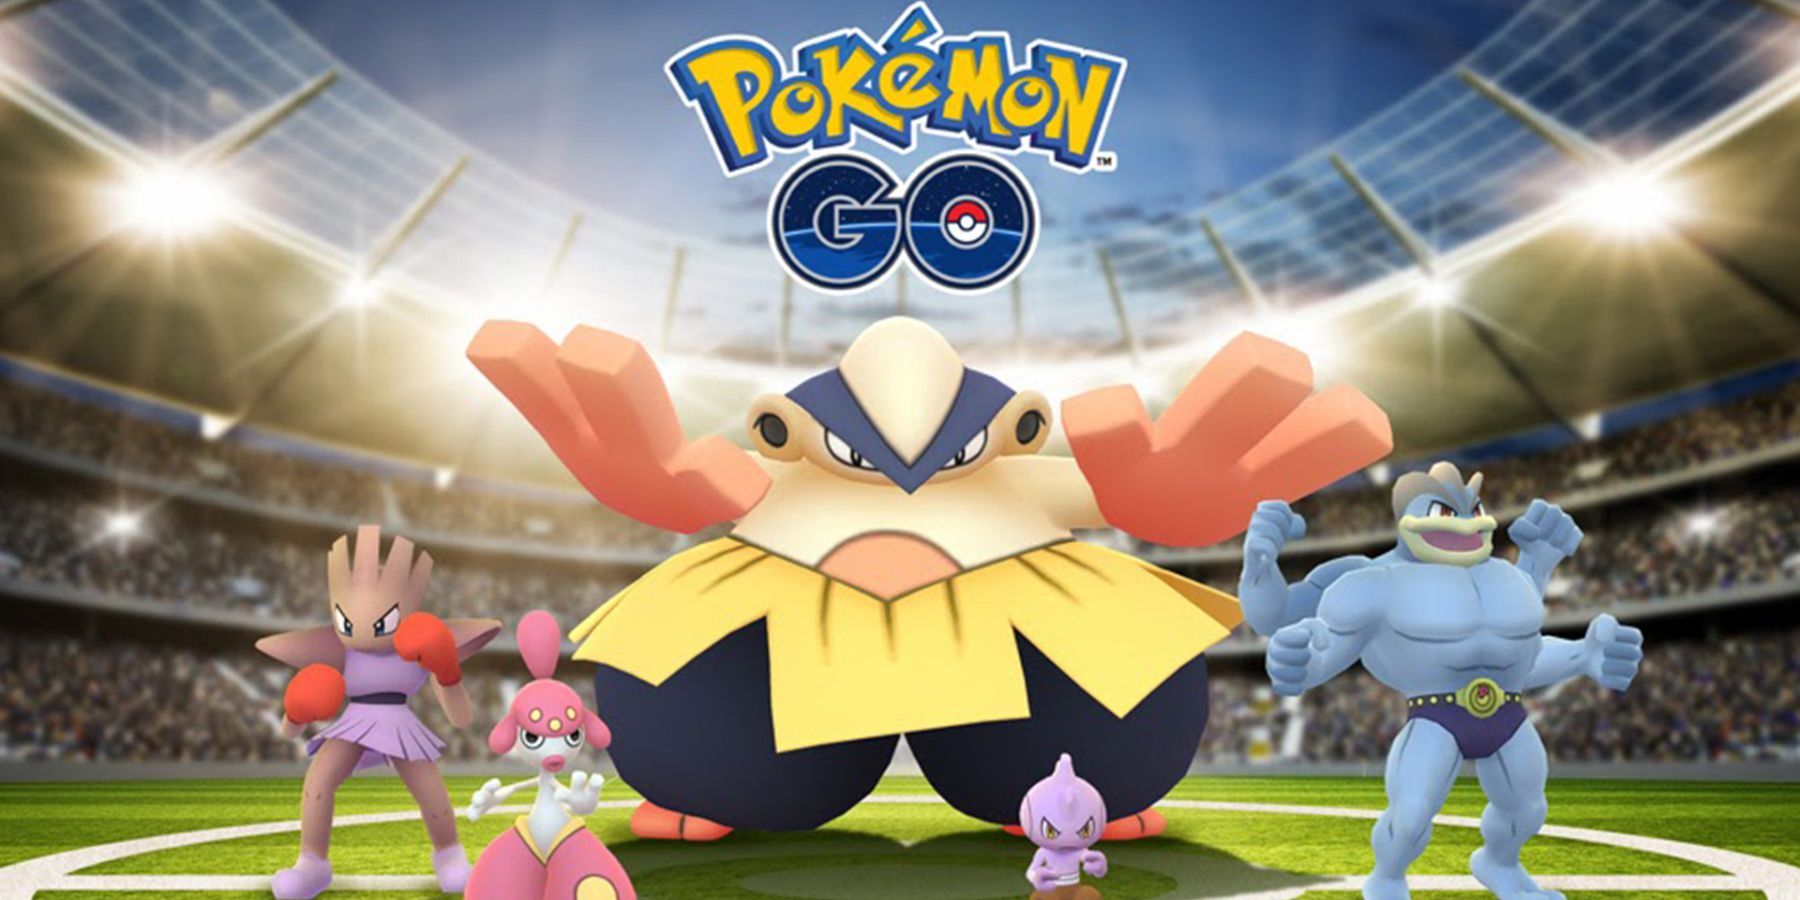 Promotional picture for Pokemon GO